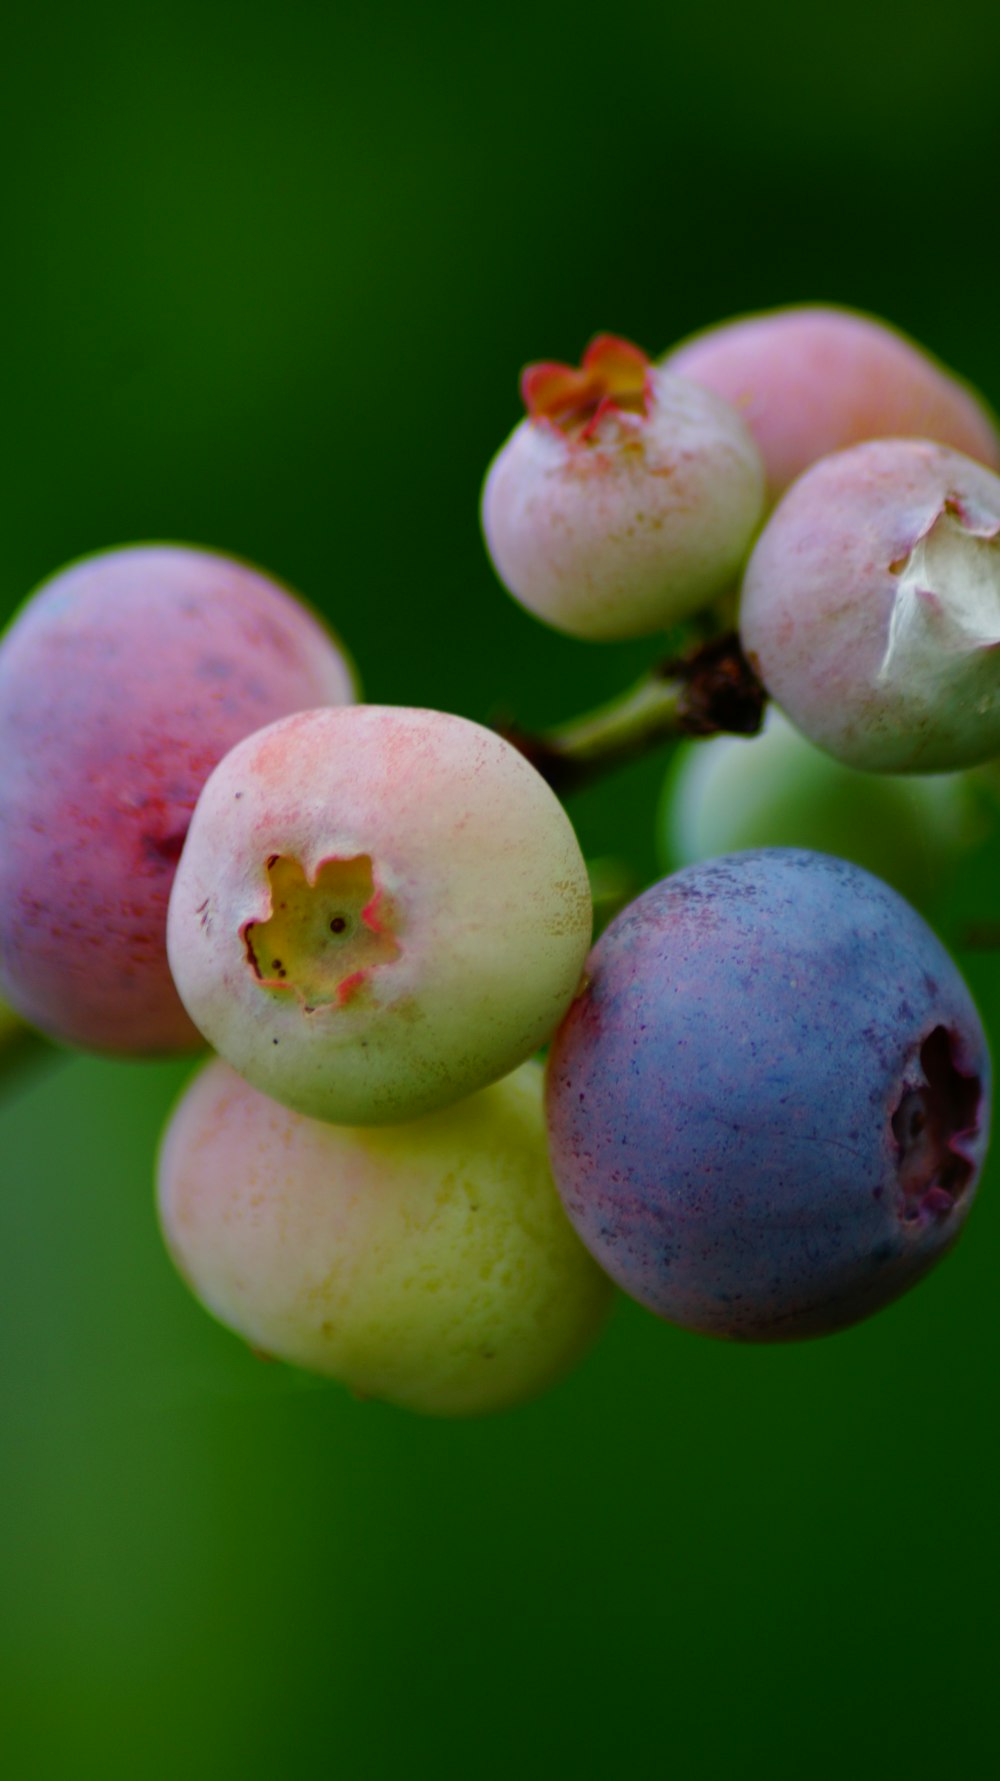 pink round fruits in close up photography